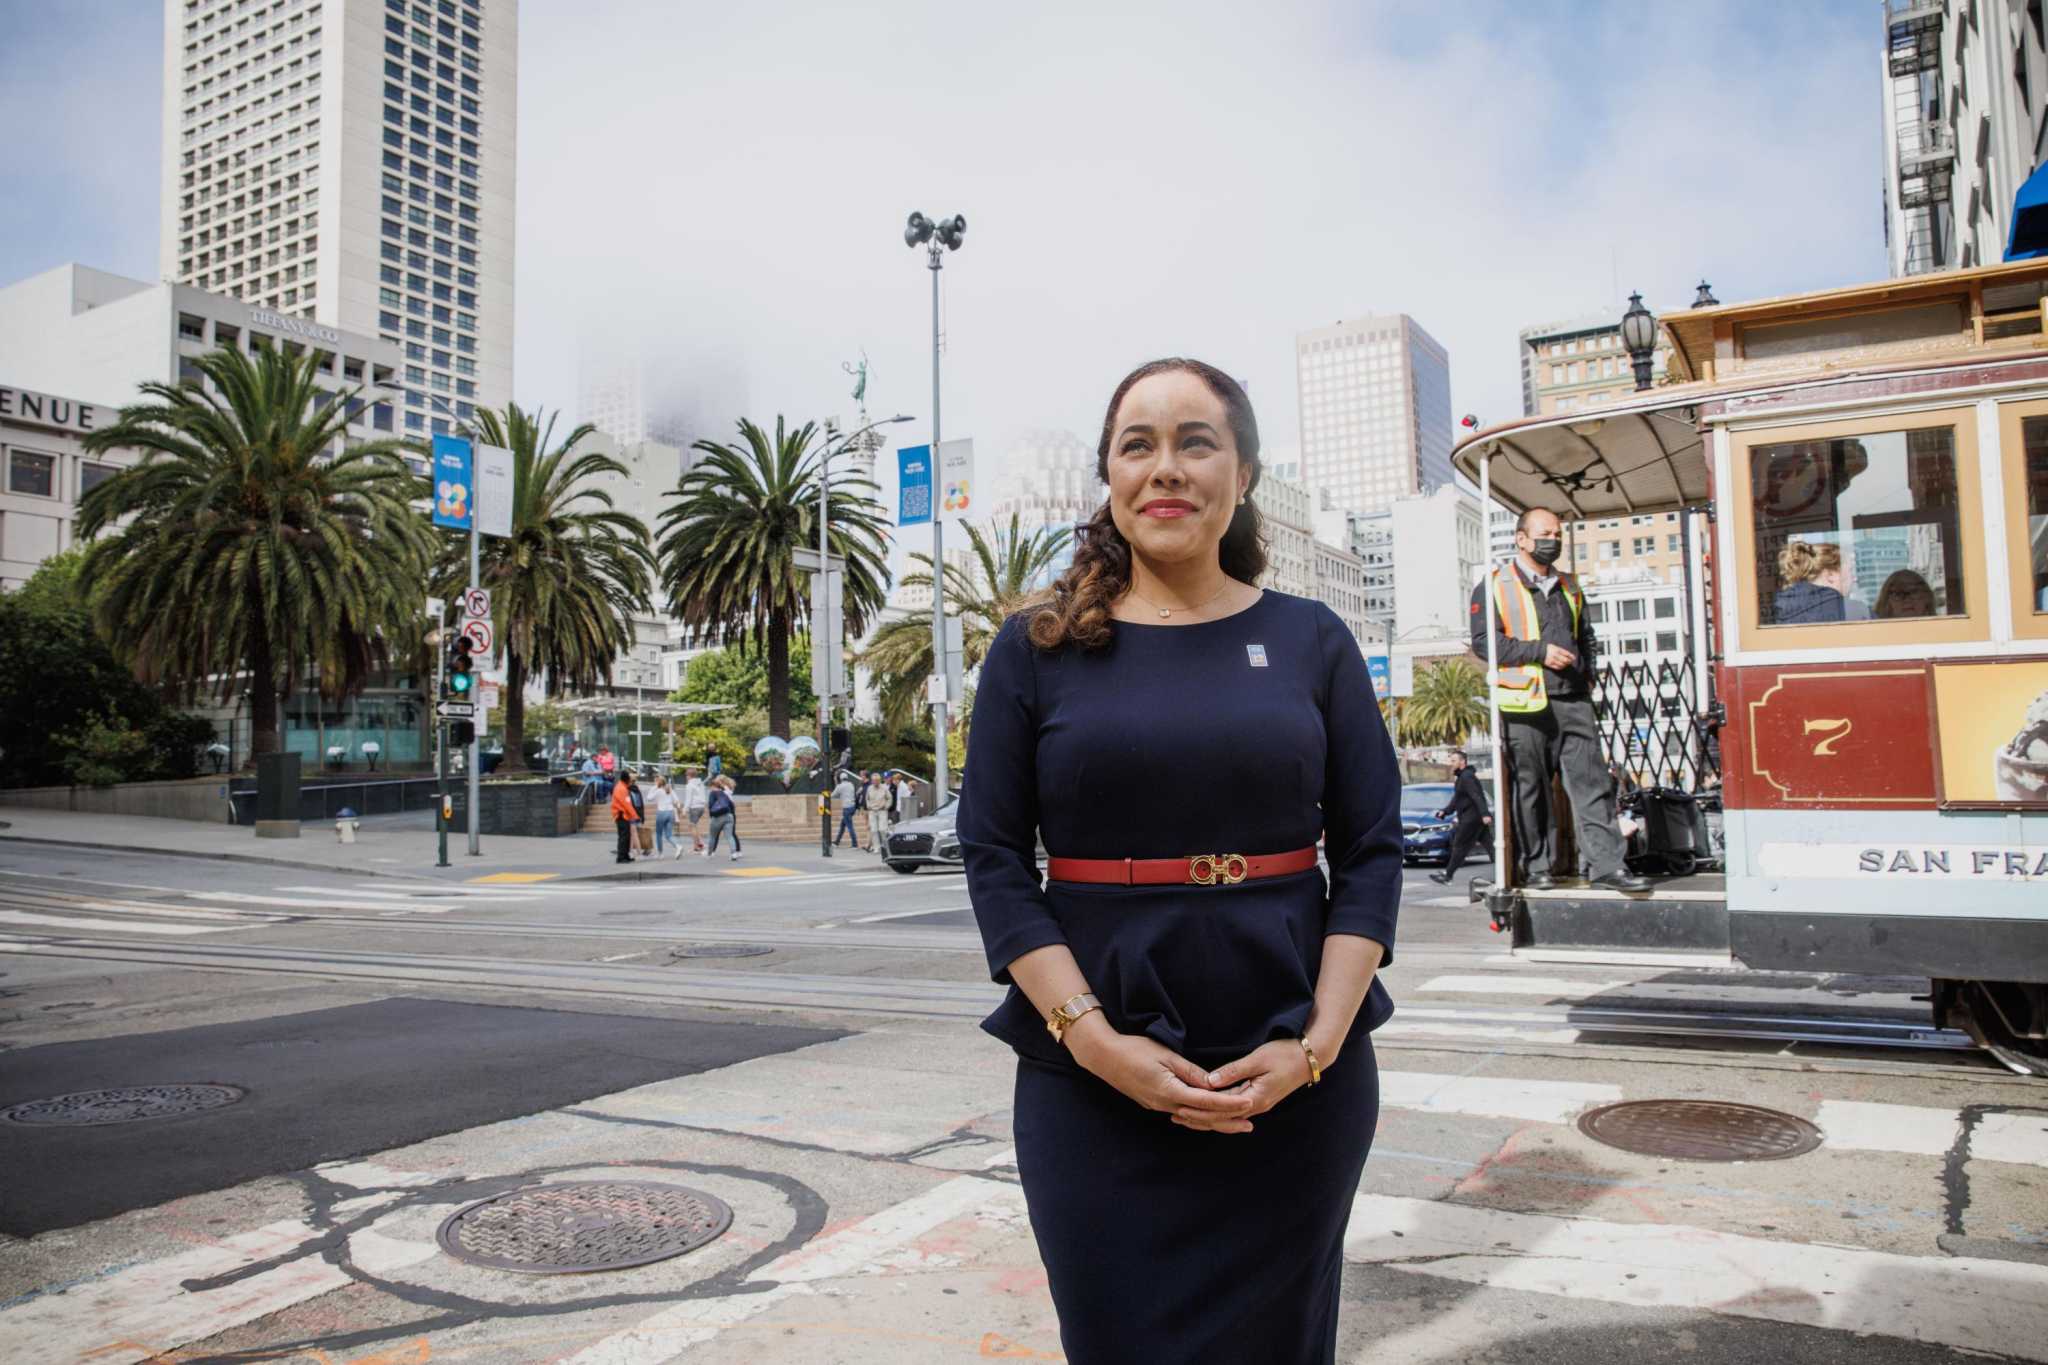 S.F.'s Union Square is struggling. Can this S.F. native bring it back from  the brink?